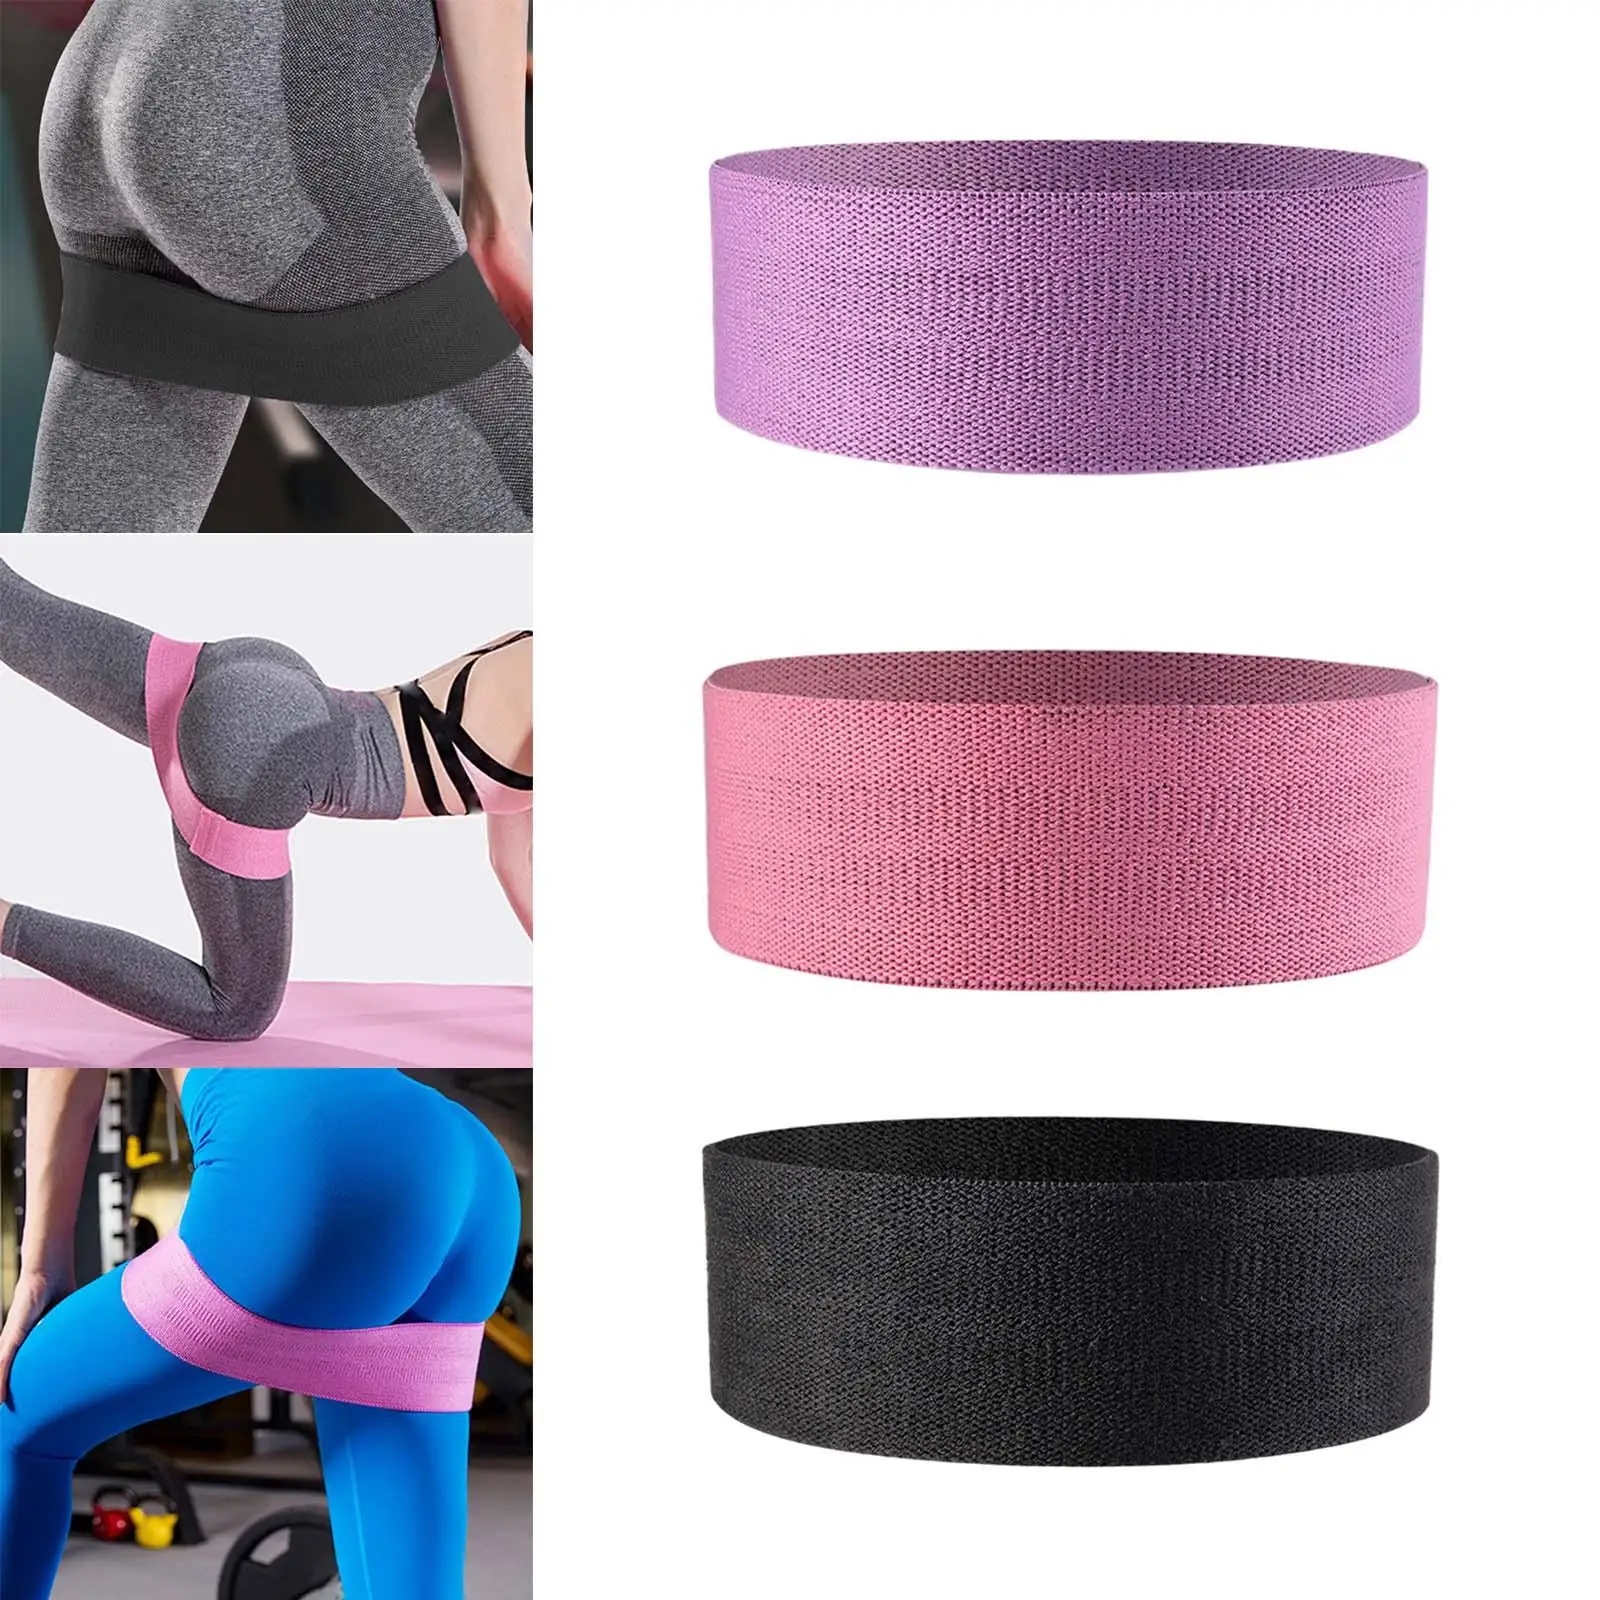 Fabric Resistance Band Women and Men Booty Band Thigh Band for Workout Exercise Band Resistance Loop for Legs and Butt